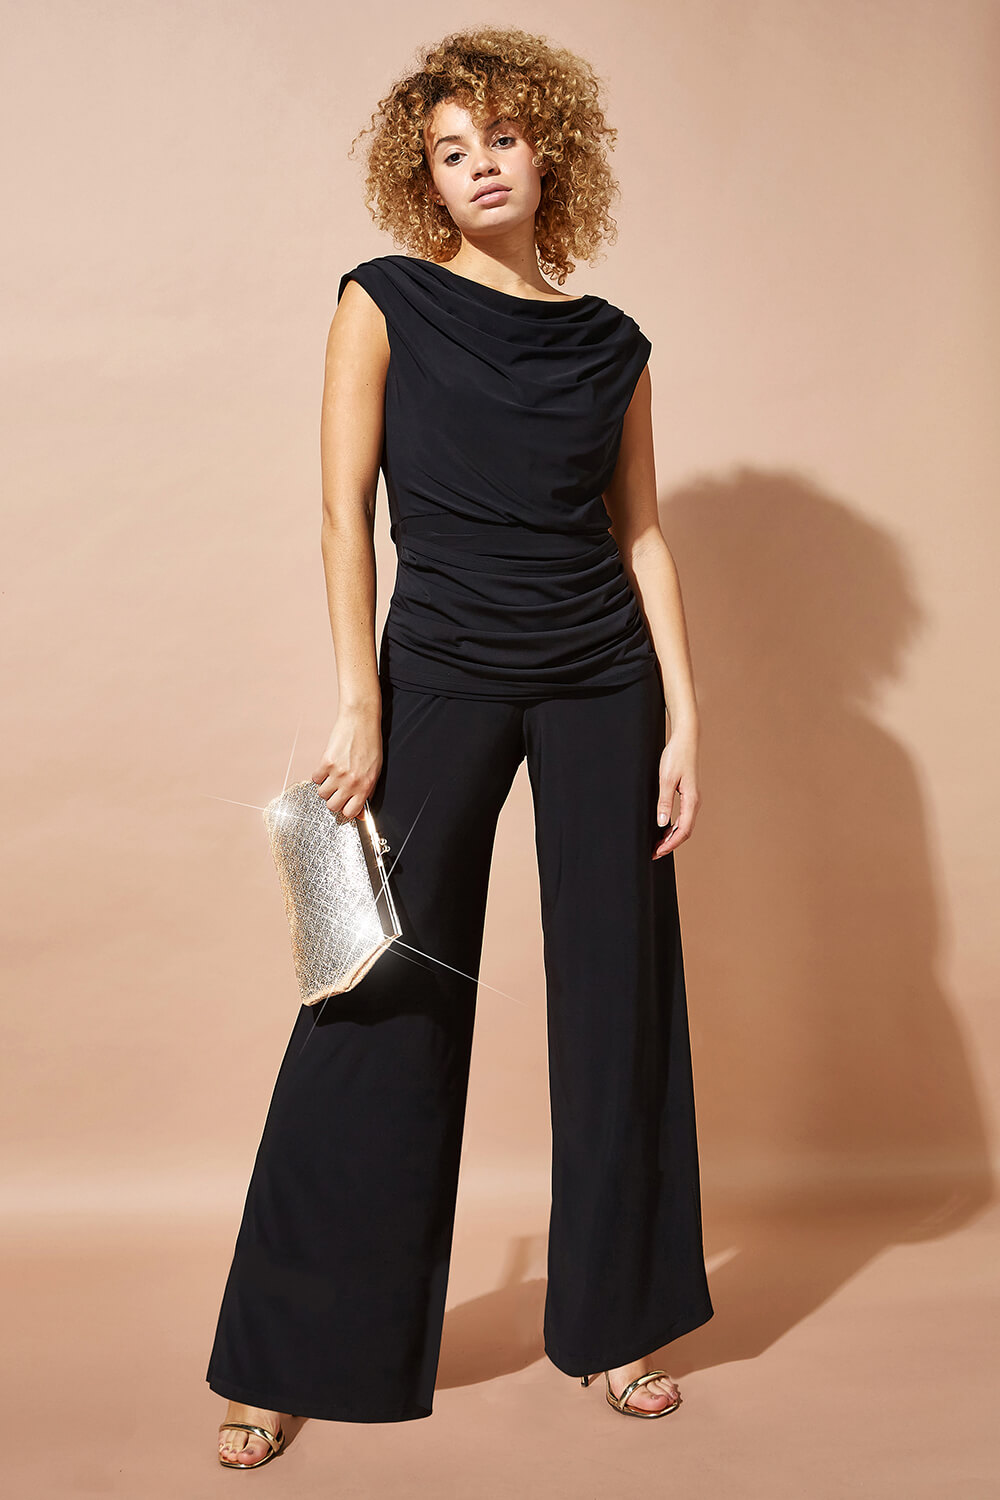 Black Cowl Neck Ruched Stretch Jumpsuit, Image 1 of 6